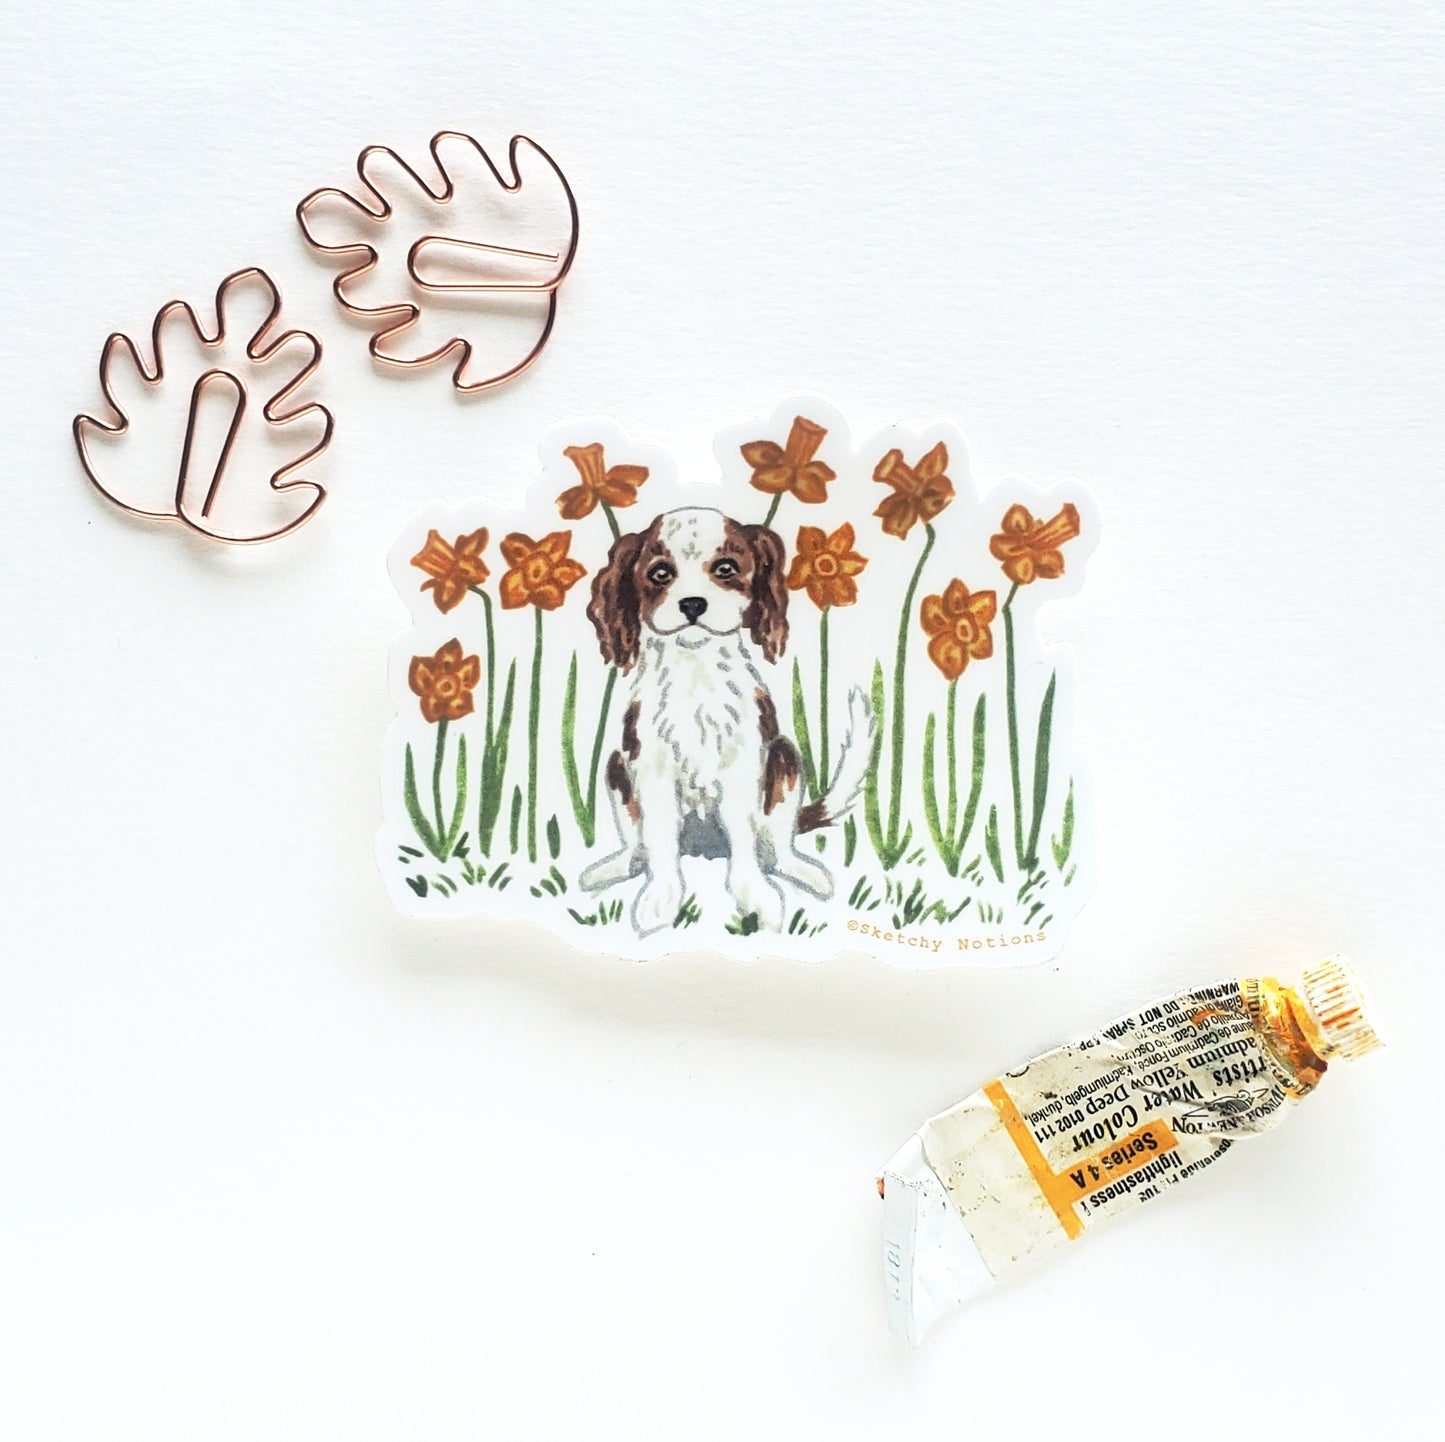 Tiny Dog and Flower Sticker 3 - Cavalier King Charles Spaniel with Daffodils